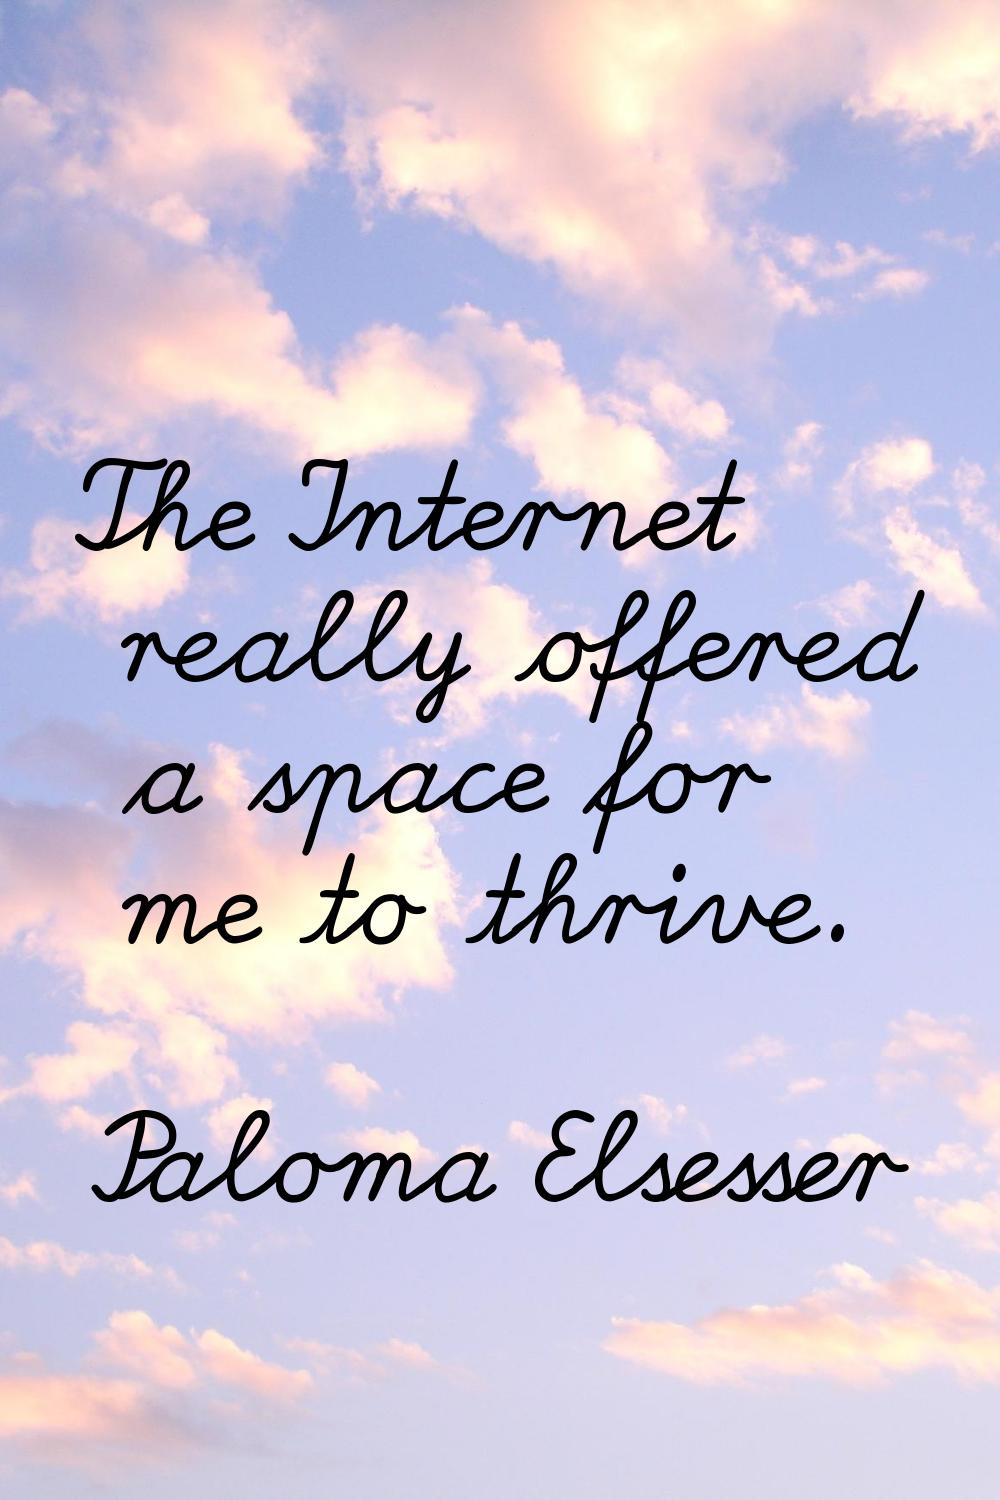 The Internet really offered a space for me to thrive.